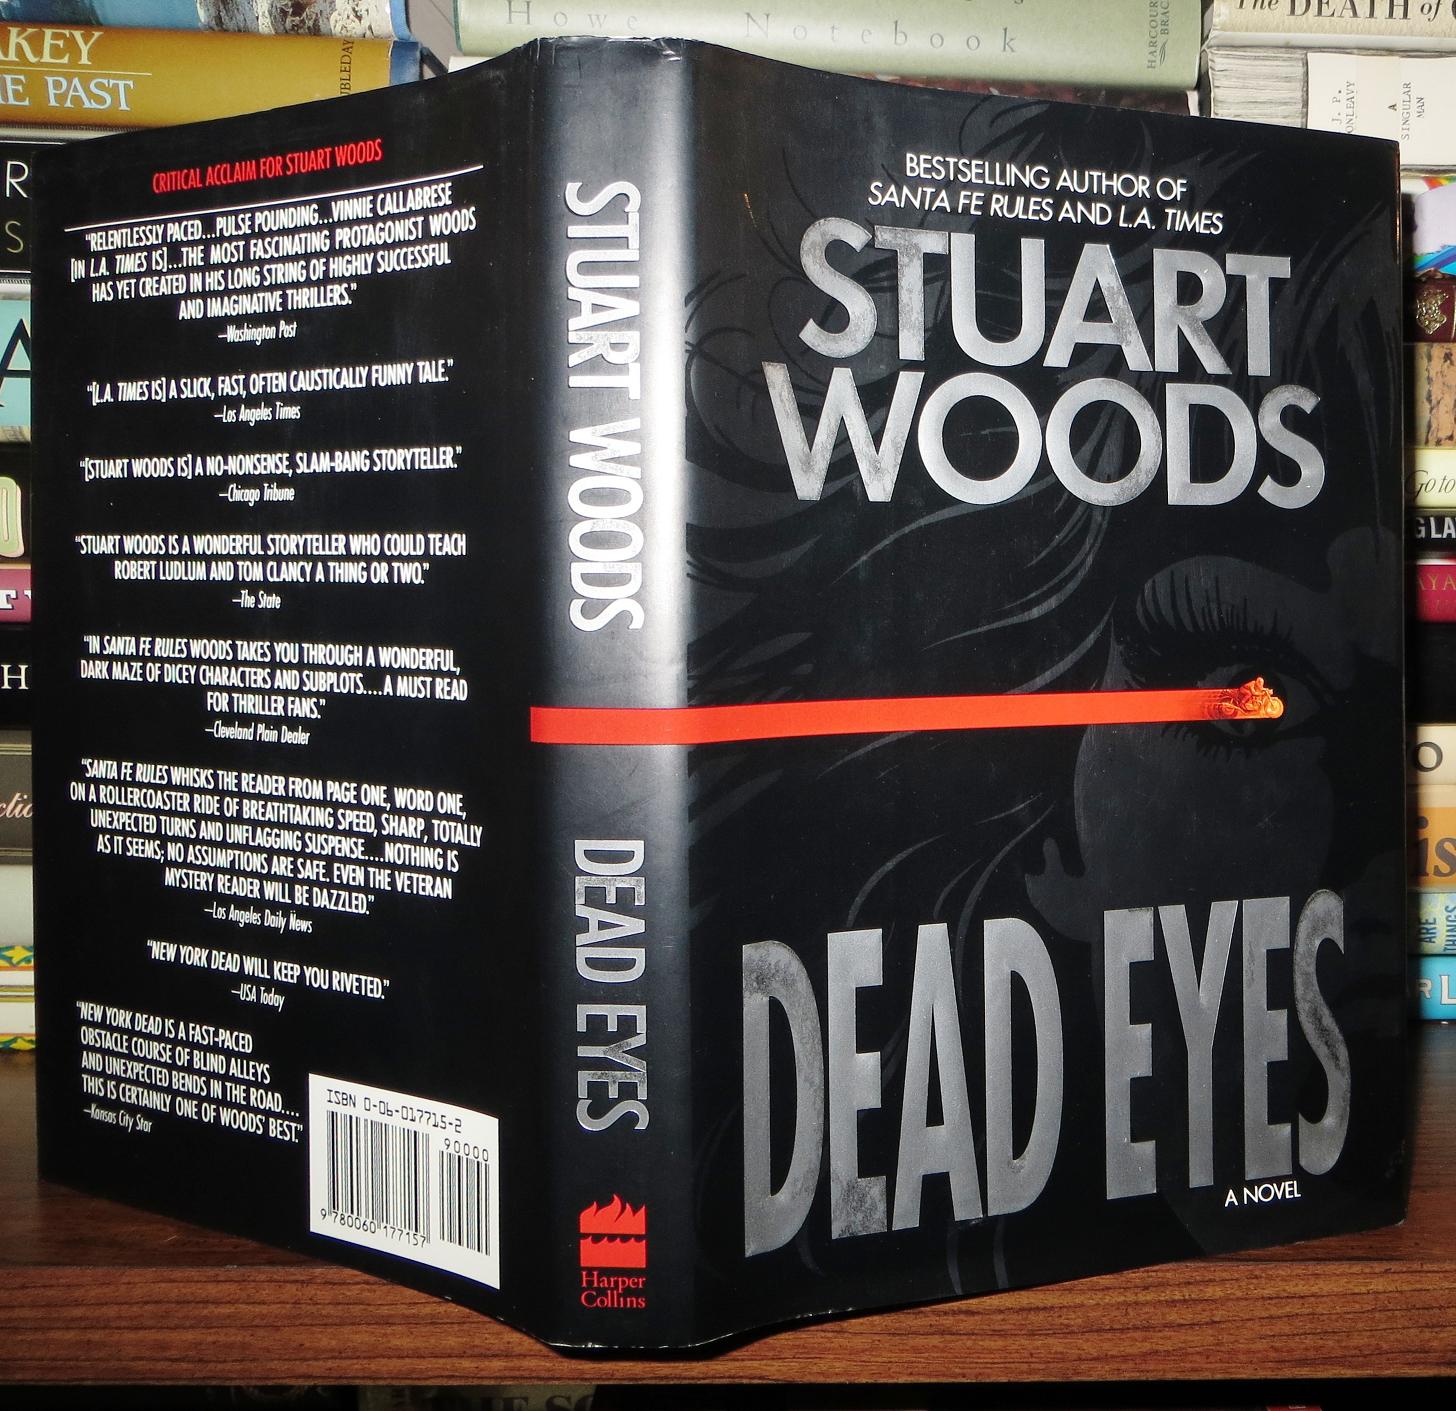 DEAD EYES Stuart Woods First Edition; First Printing